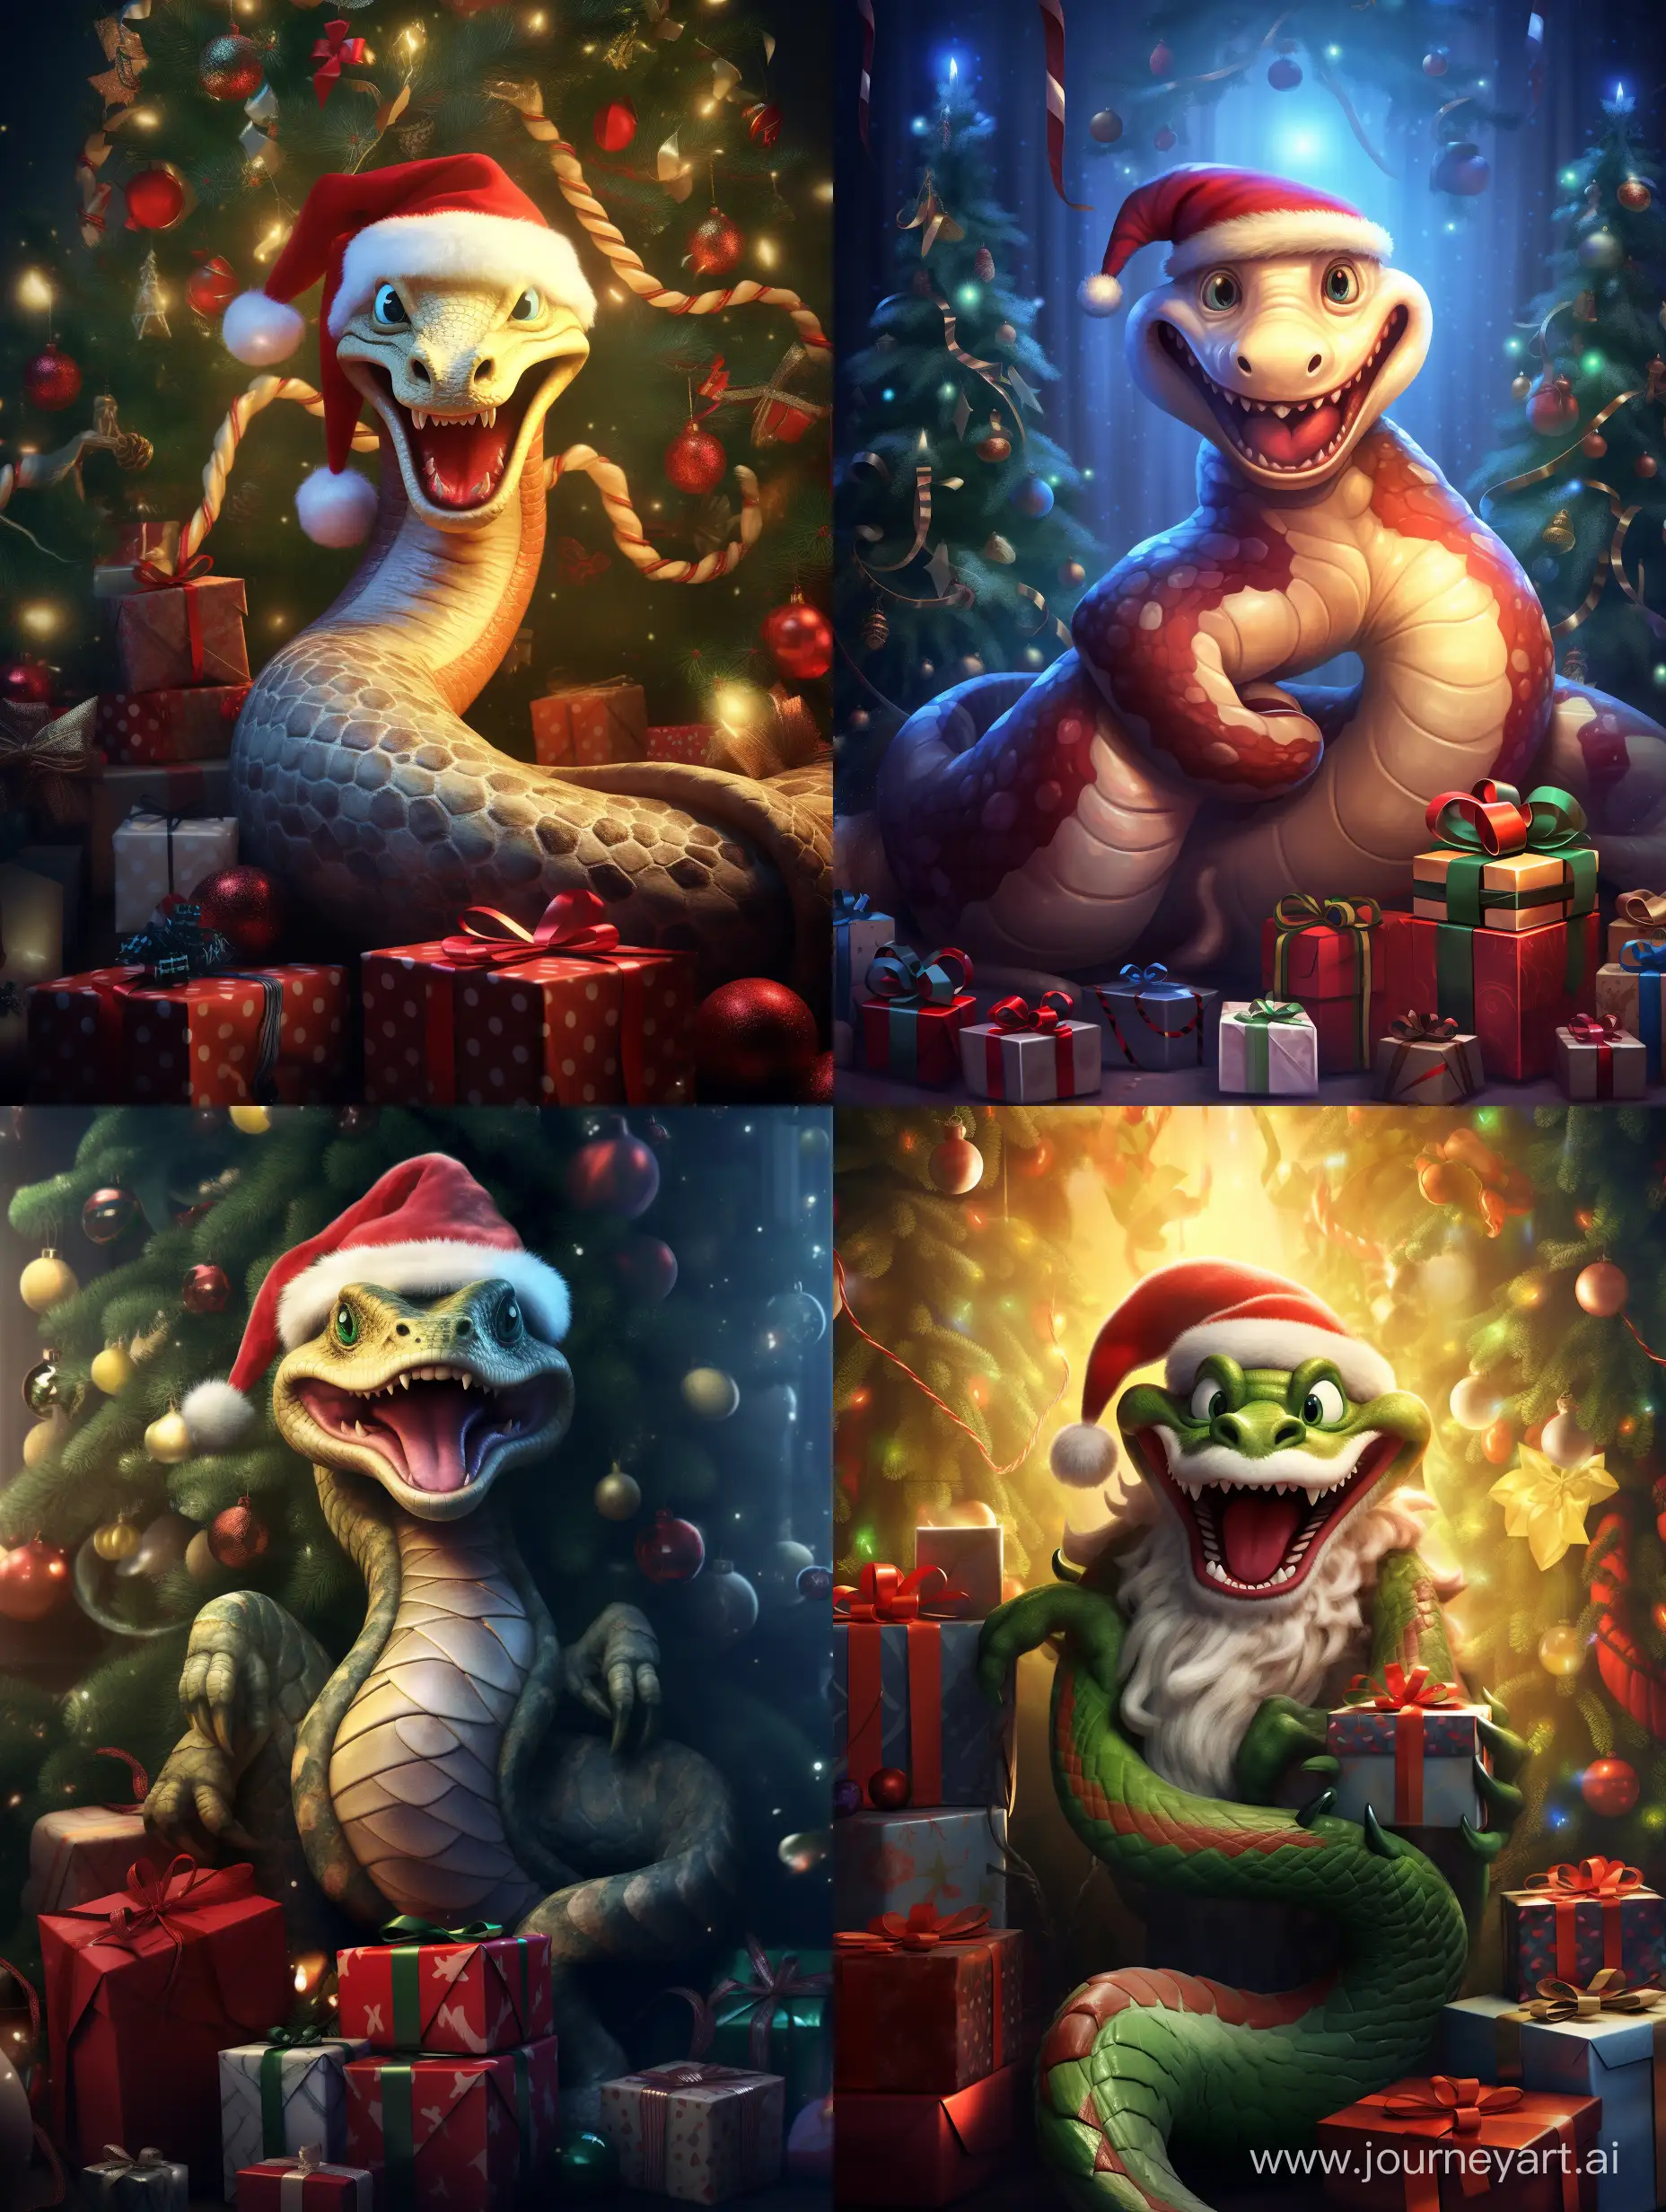 A kind, cute Disney-style snake in a Santa Claus hat sits on a Christmas tree decorated with balloons and garlands, lights. There are a lot of presents under the tree.